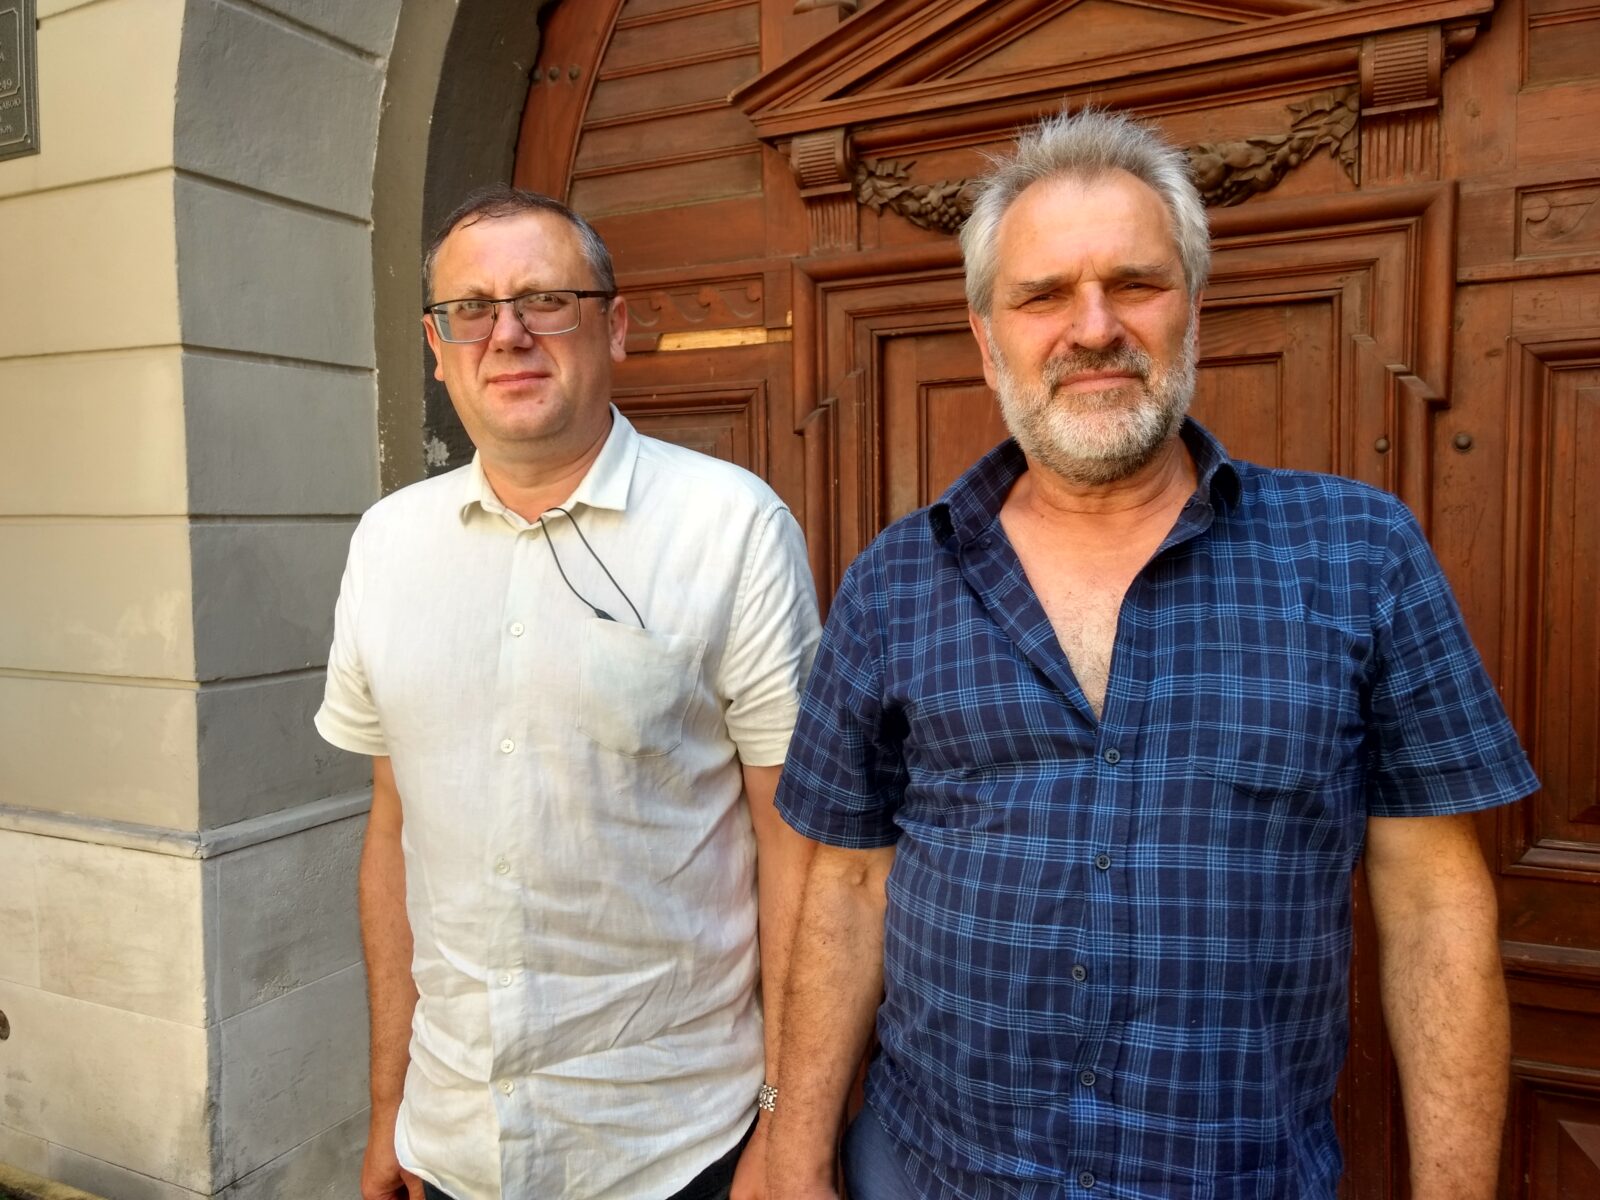 Vasyl Prokopyshyn (left) and Serhiy Verbytskyi in Lviv, Ukraine, on July 1, 2022. Verbytskyi's brother Yuriy is remembered as the first casualty of Putin's "forever war." Prokopyshyn went to Kyiv in early 2014 to join Yuriy and others on the Euromaidan.